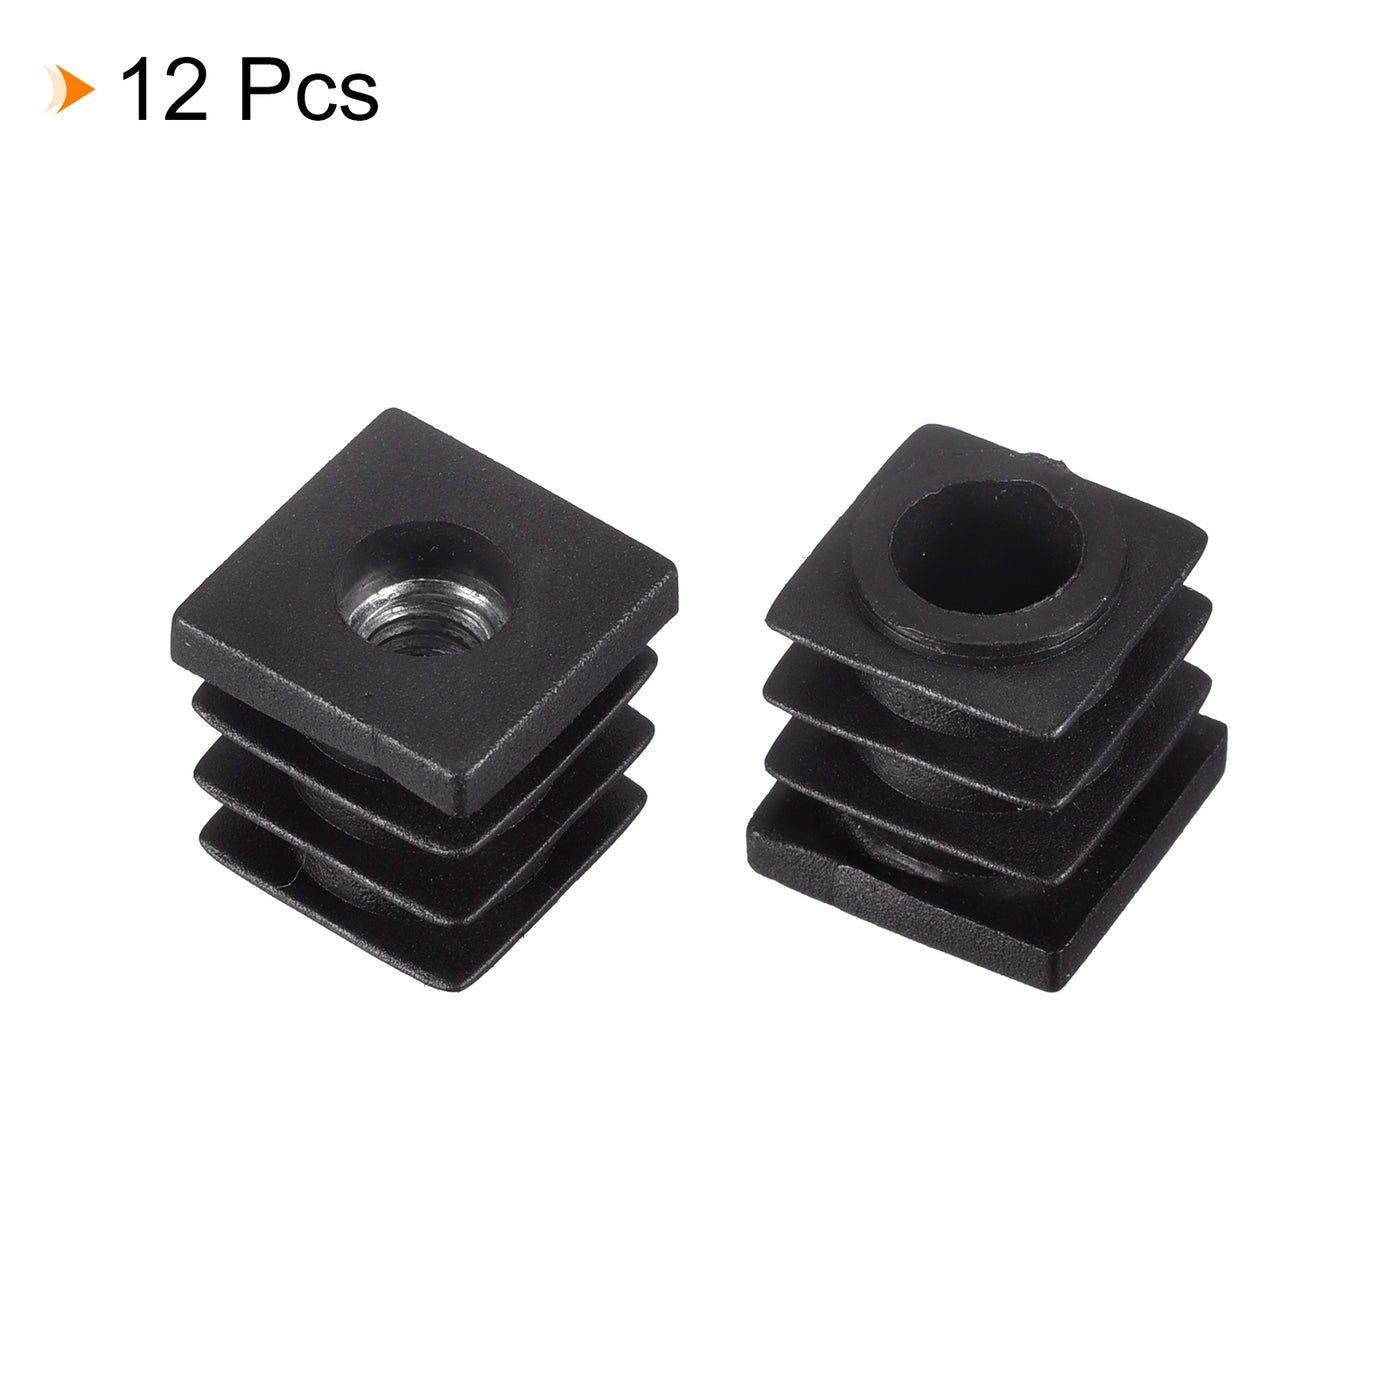 uxcell Uxcell 12Pcs 0.63"x0.63" Caster Insert with Thread, Square M6 Thread for Furniture